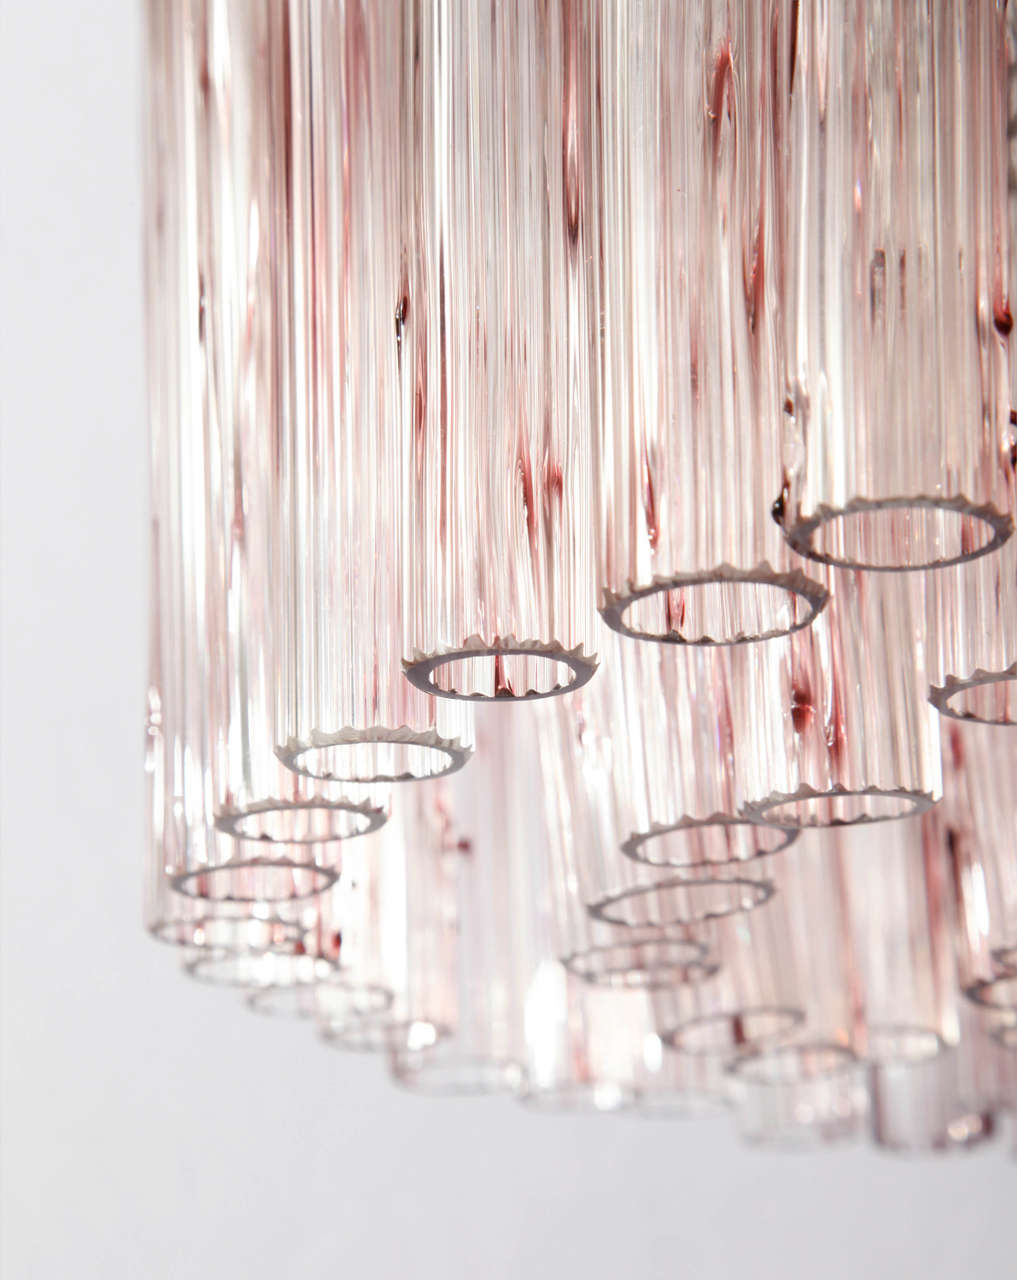 'Fiorito' glass chandelier and/or ceiling light executed by Venini, Murano (I) made of clear ribbed glass rods with purple 